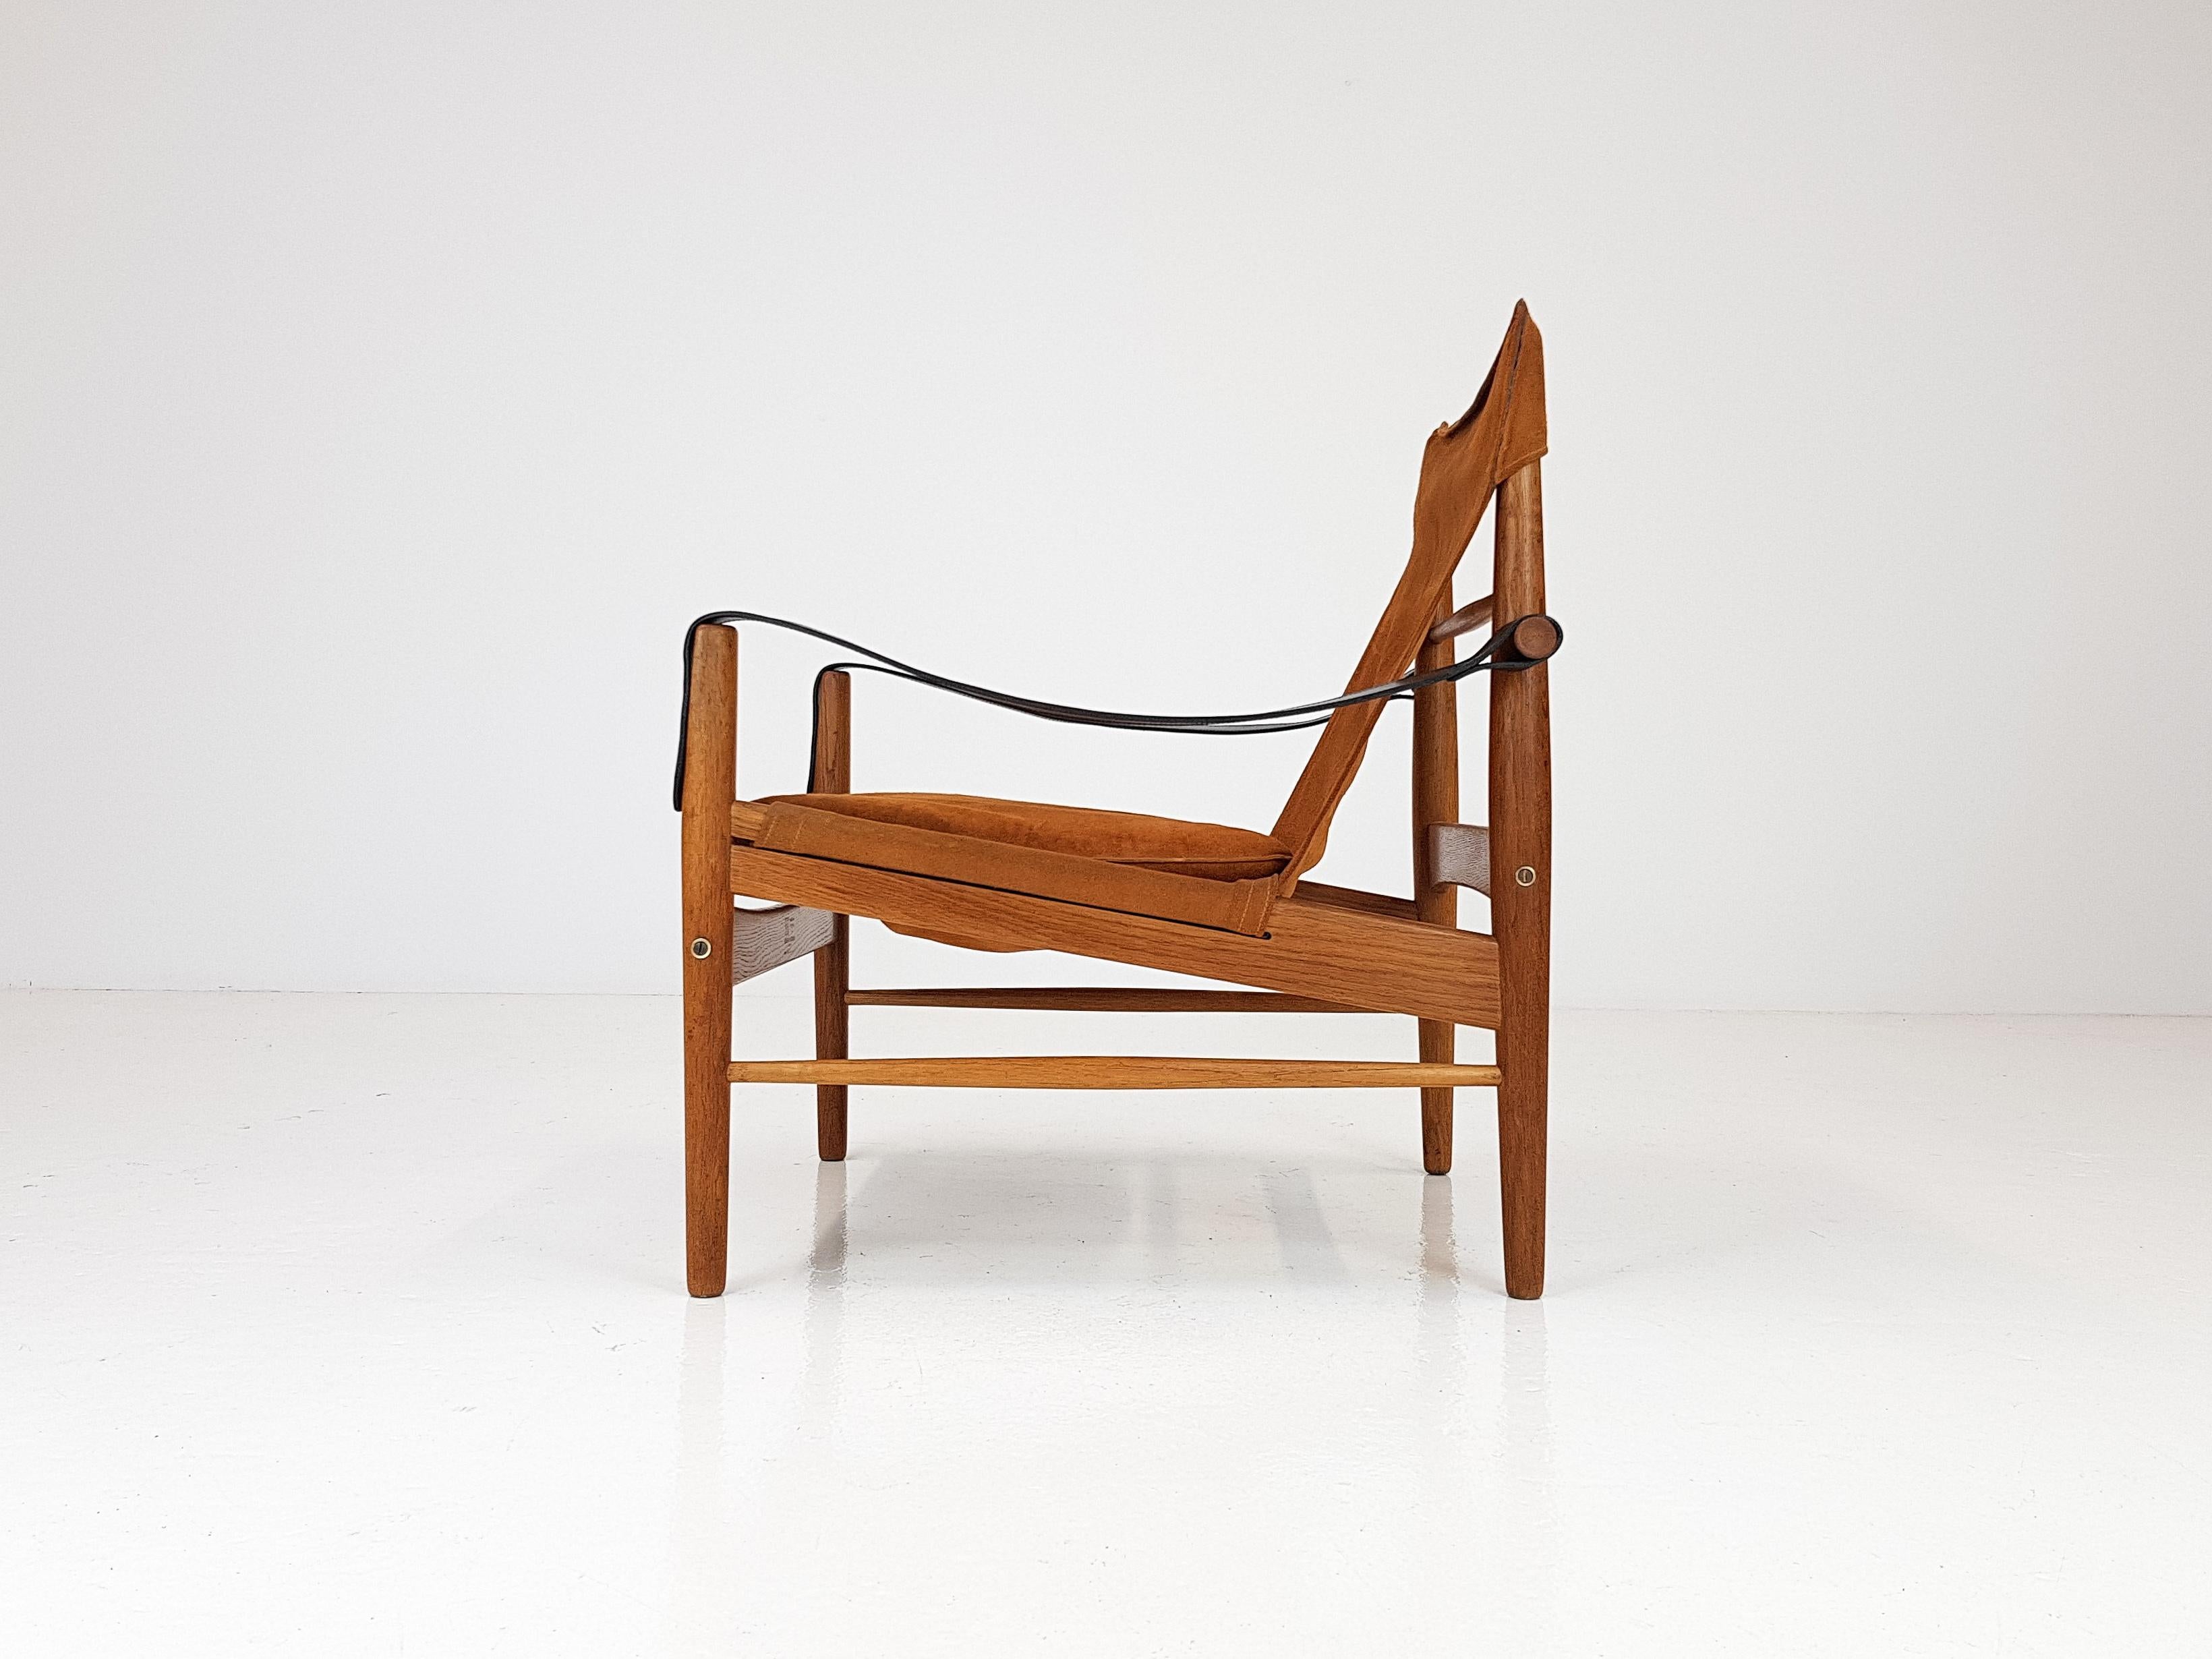 An original suede and oak frame 'Antilop' Safari chair by Hans Olsen for Viskadalens Mobler, Sweden, 1950s

With cognac suede seating and black leather strap arms and a solid oak frame. The chair has an all-dowel construction as most Safari chairs